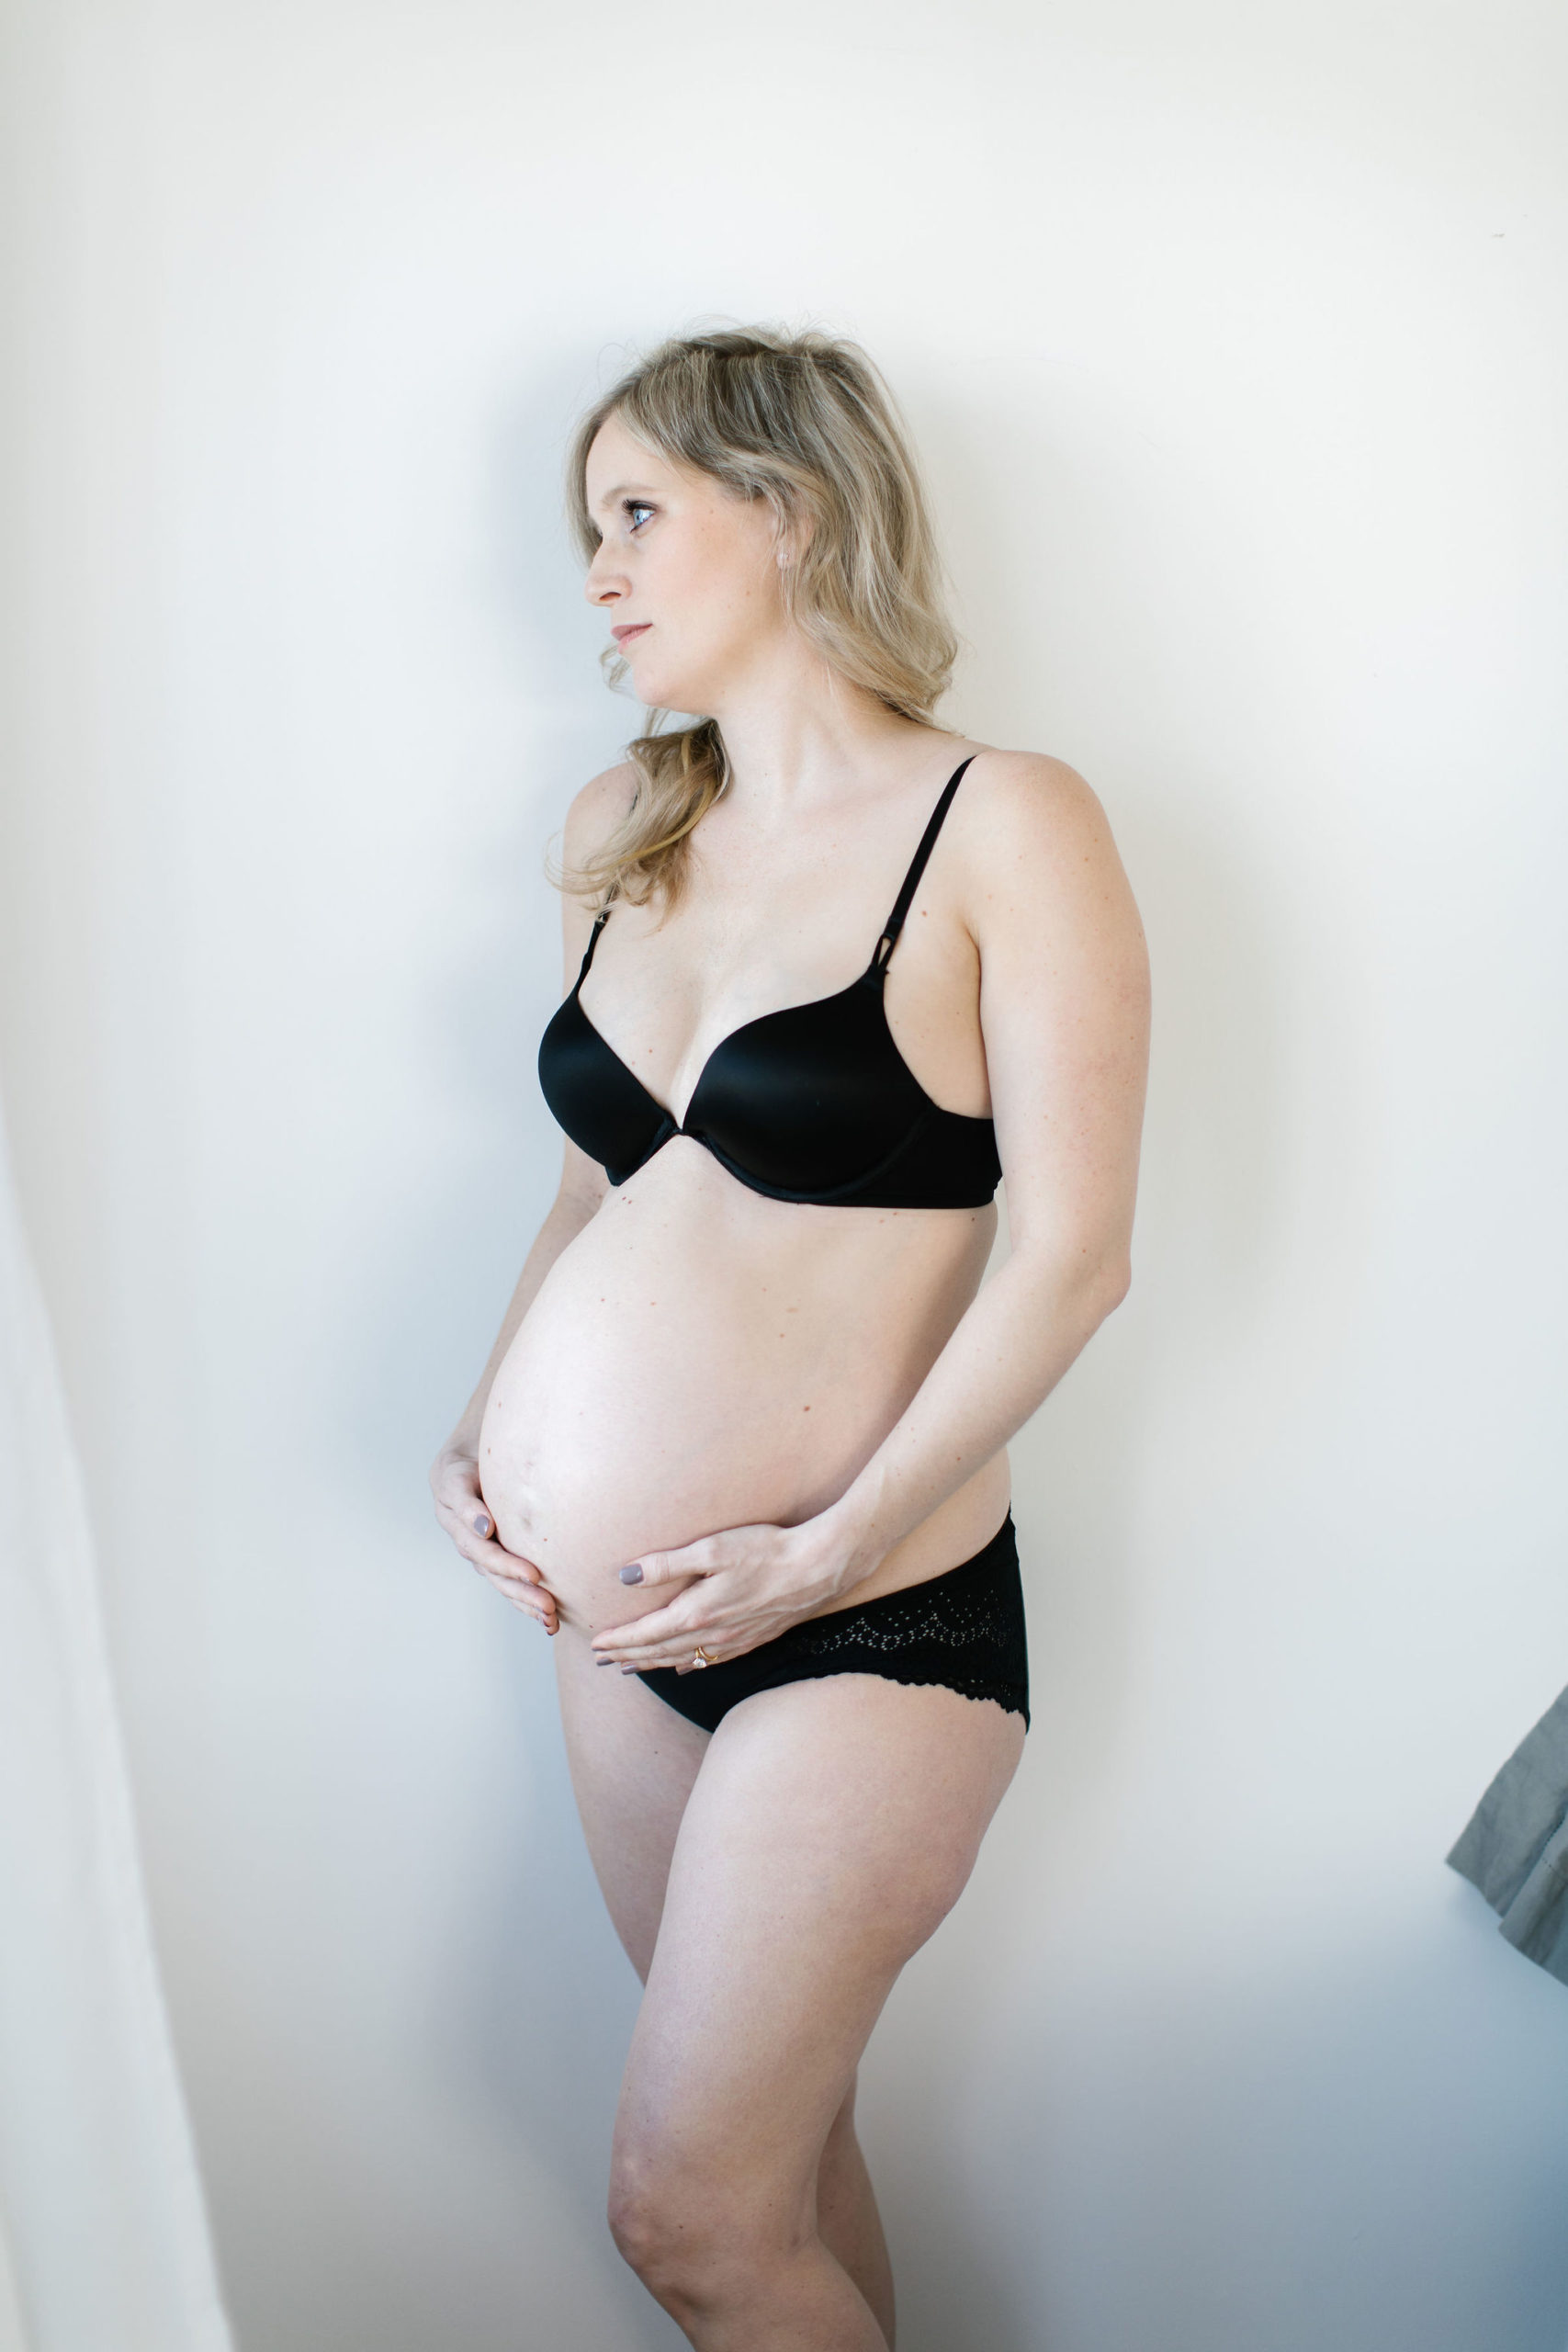 Chicago boudoir photographer Boudoir By Elle captures simple maternity photo shoot and this unique time of my life